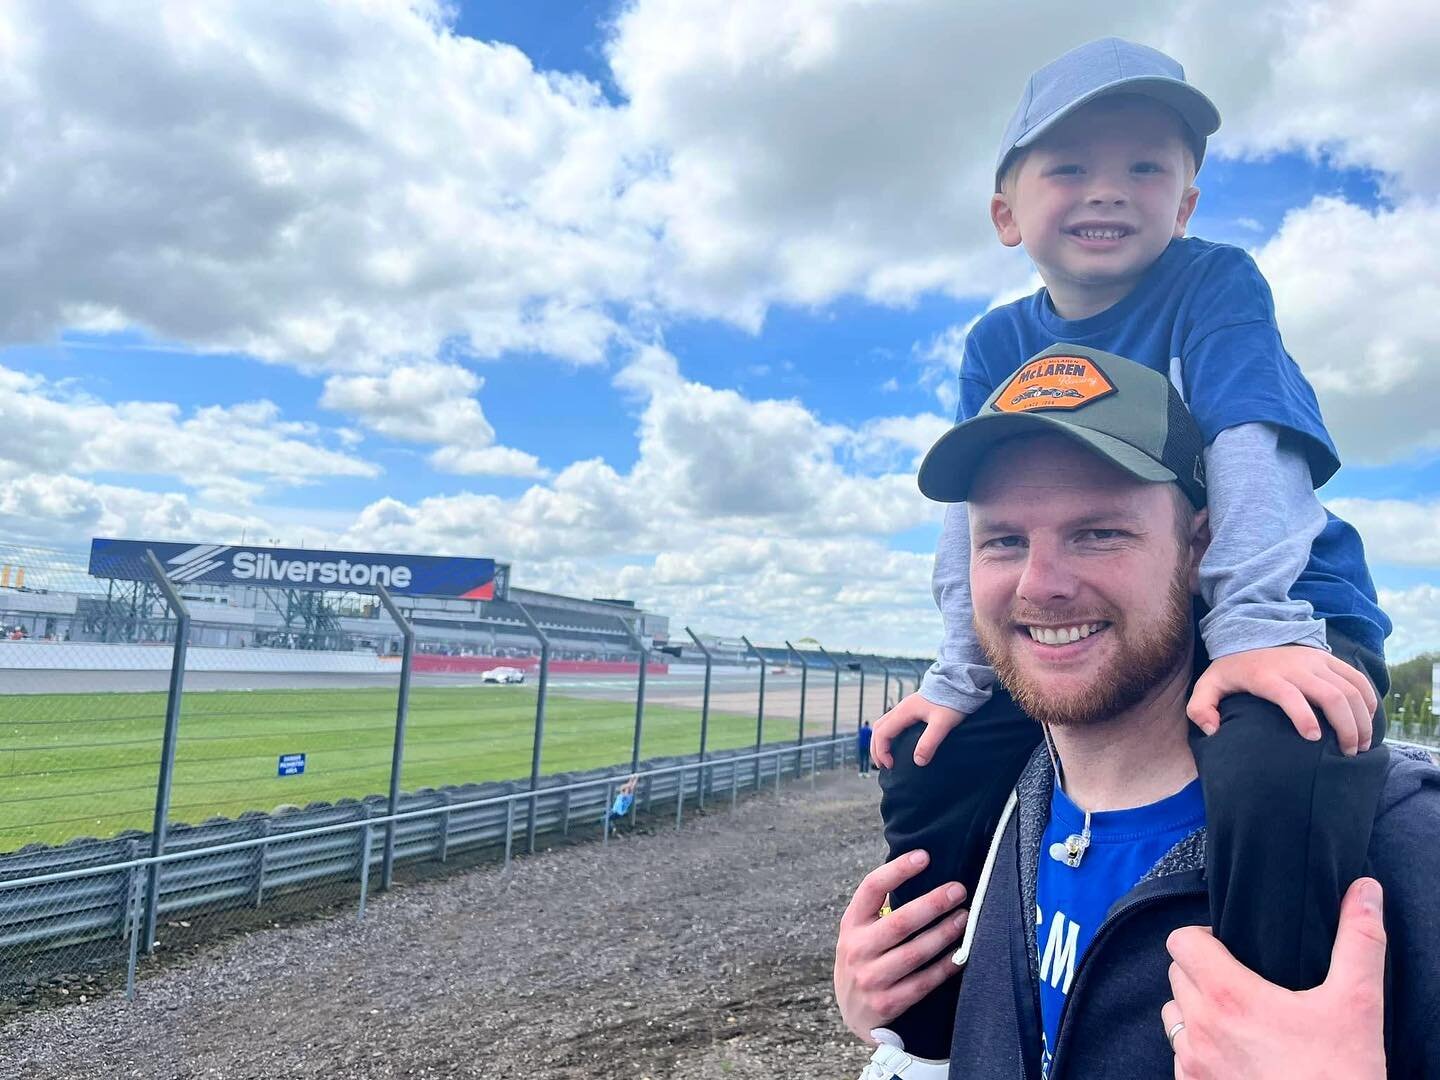 Had an absolutely fantastic day at @silverstonecircuit watching @british_gt beautiful weather, great track action and amazing access to cars and drivers. 

I think the boy will be more of a petrol head than me soon, he was chuffed to be able to get s